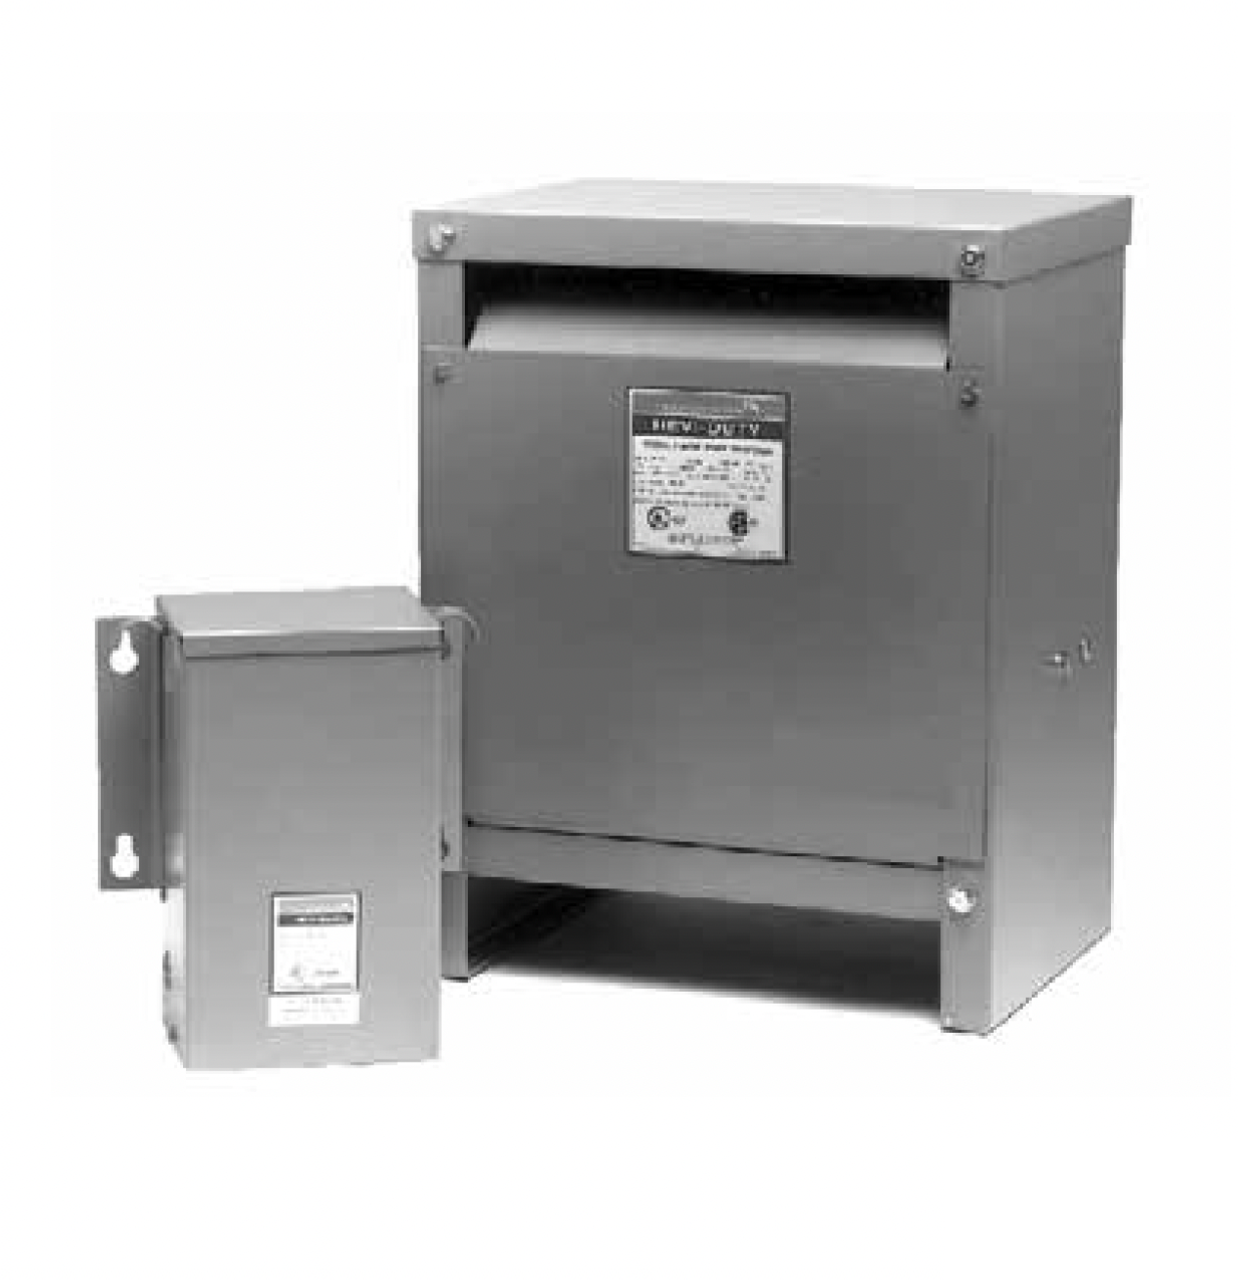 SolaHD Emerson - DT651H175S Dry-Type Distribution Transformers